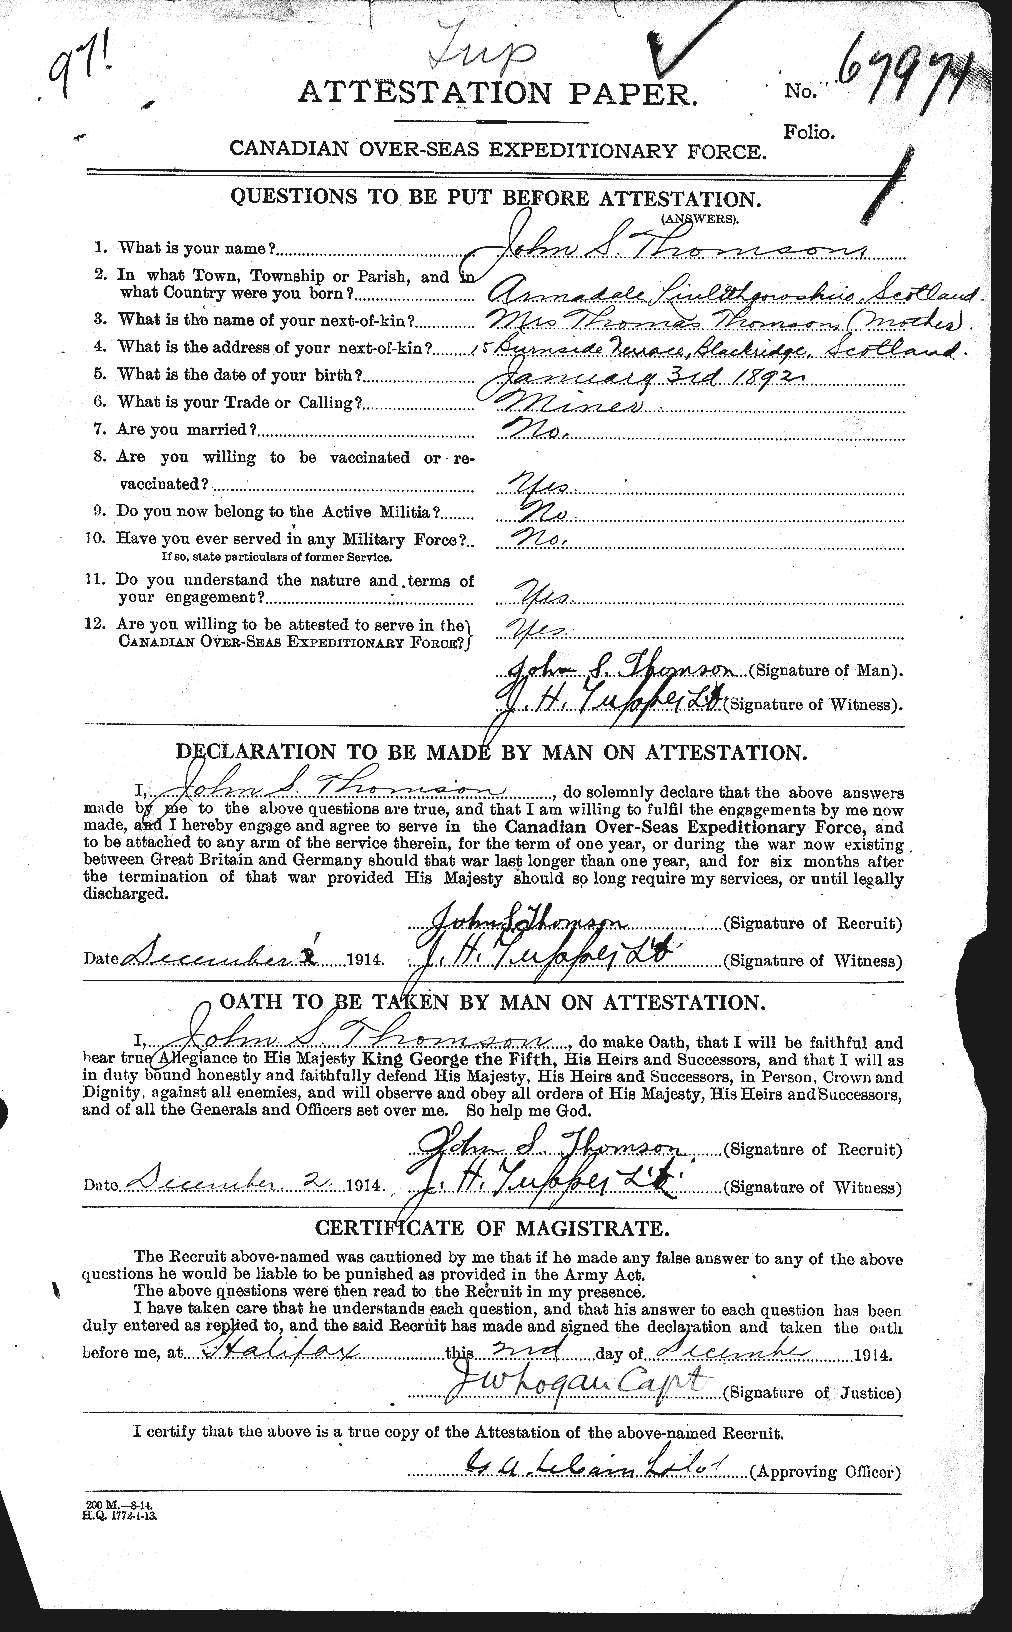 Personnel Records of the First World War - CEF 633413a